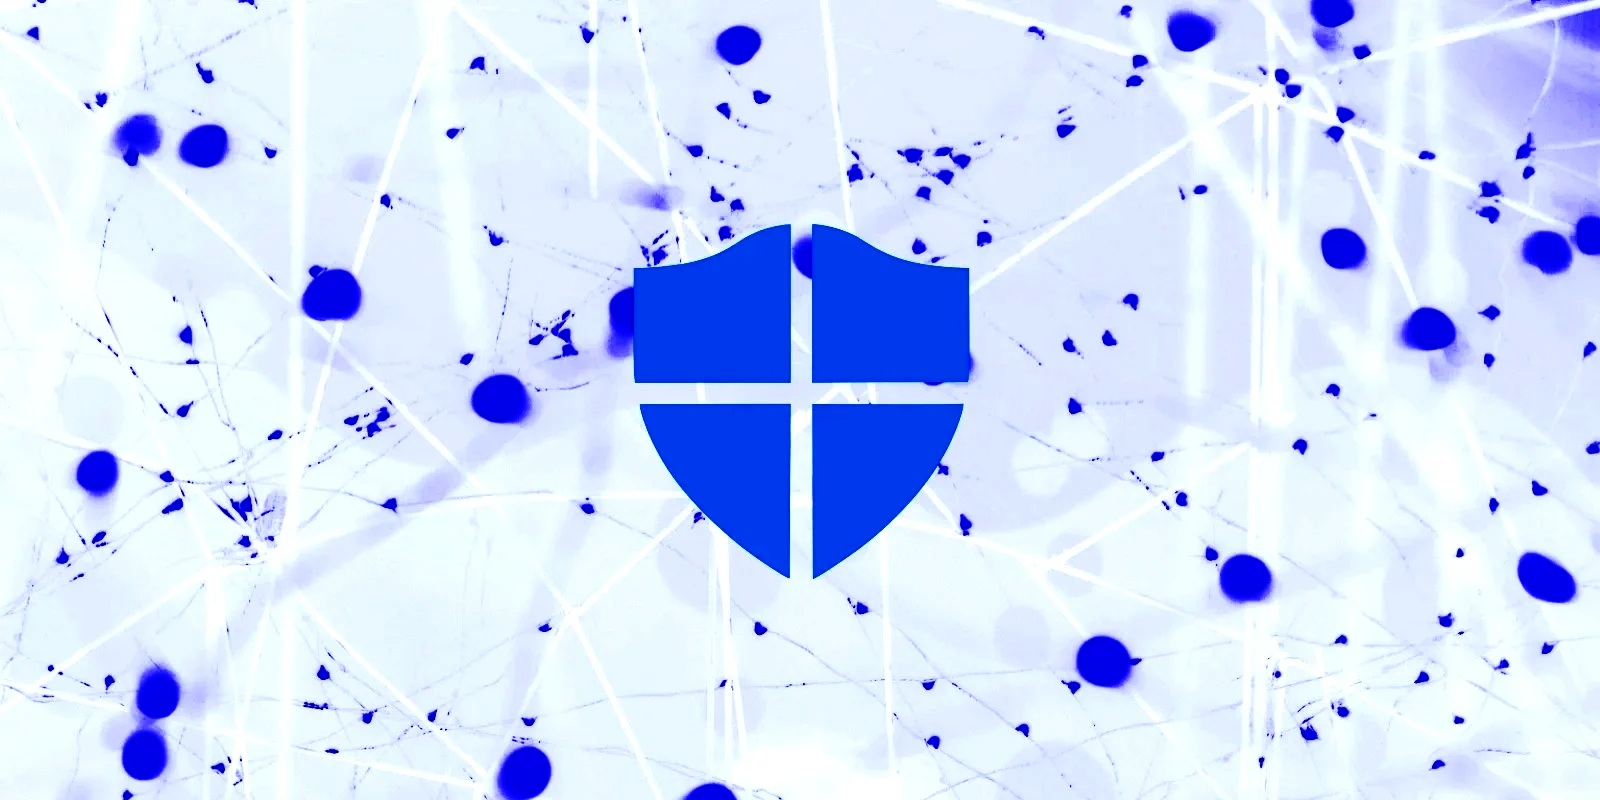 Microsoft Defender for Endpoint on iOS